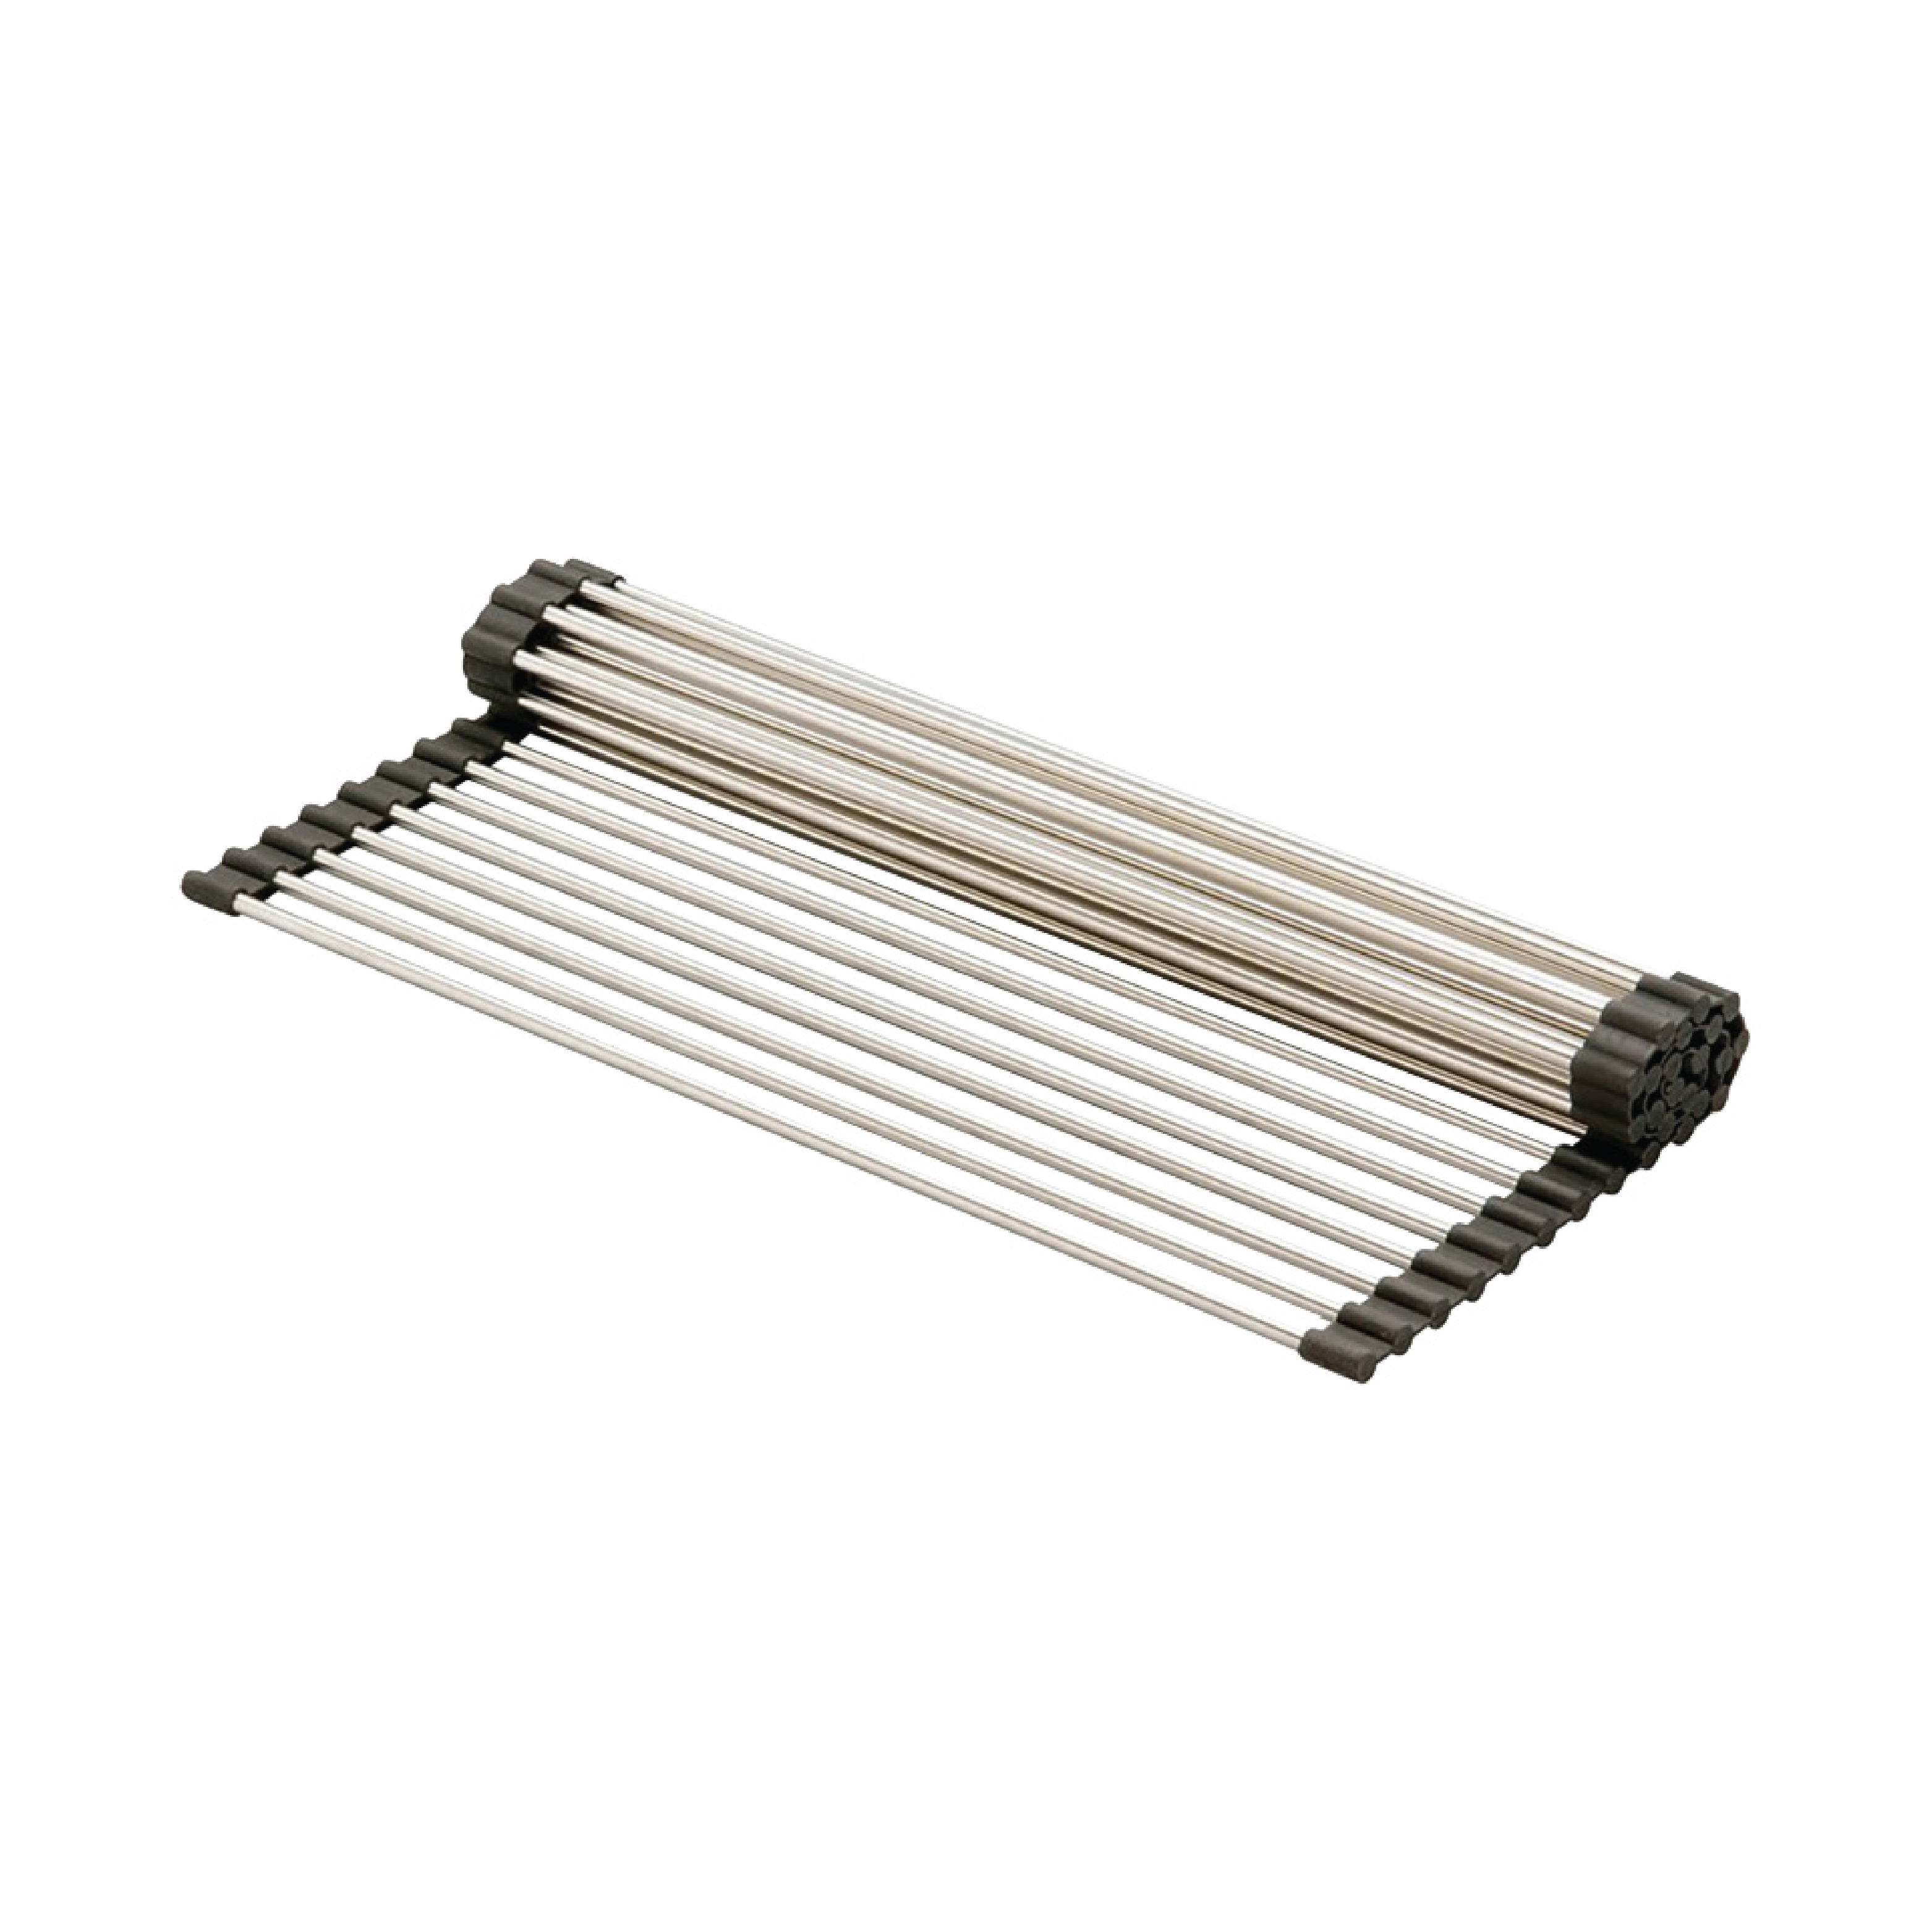 18" Stainless Steel Rolling Grid